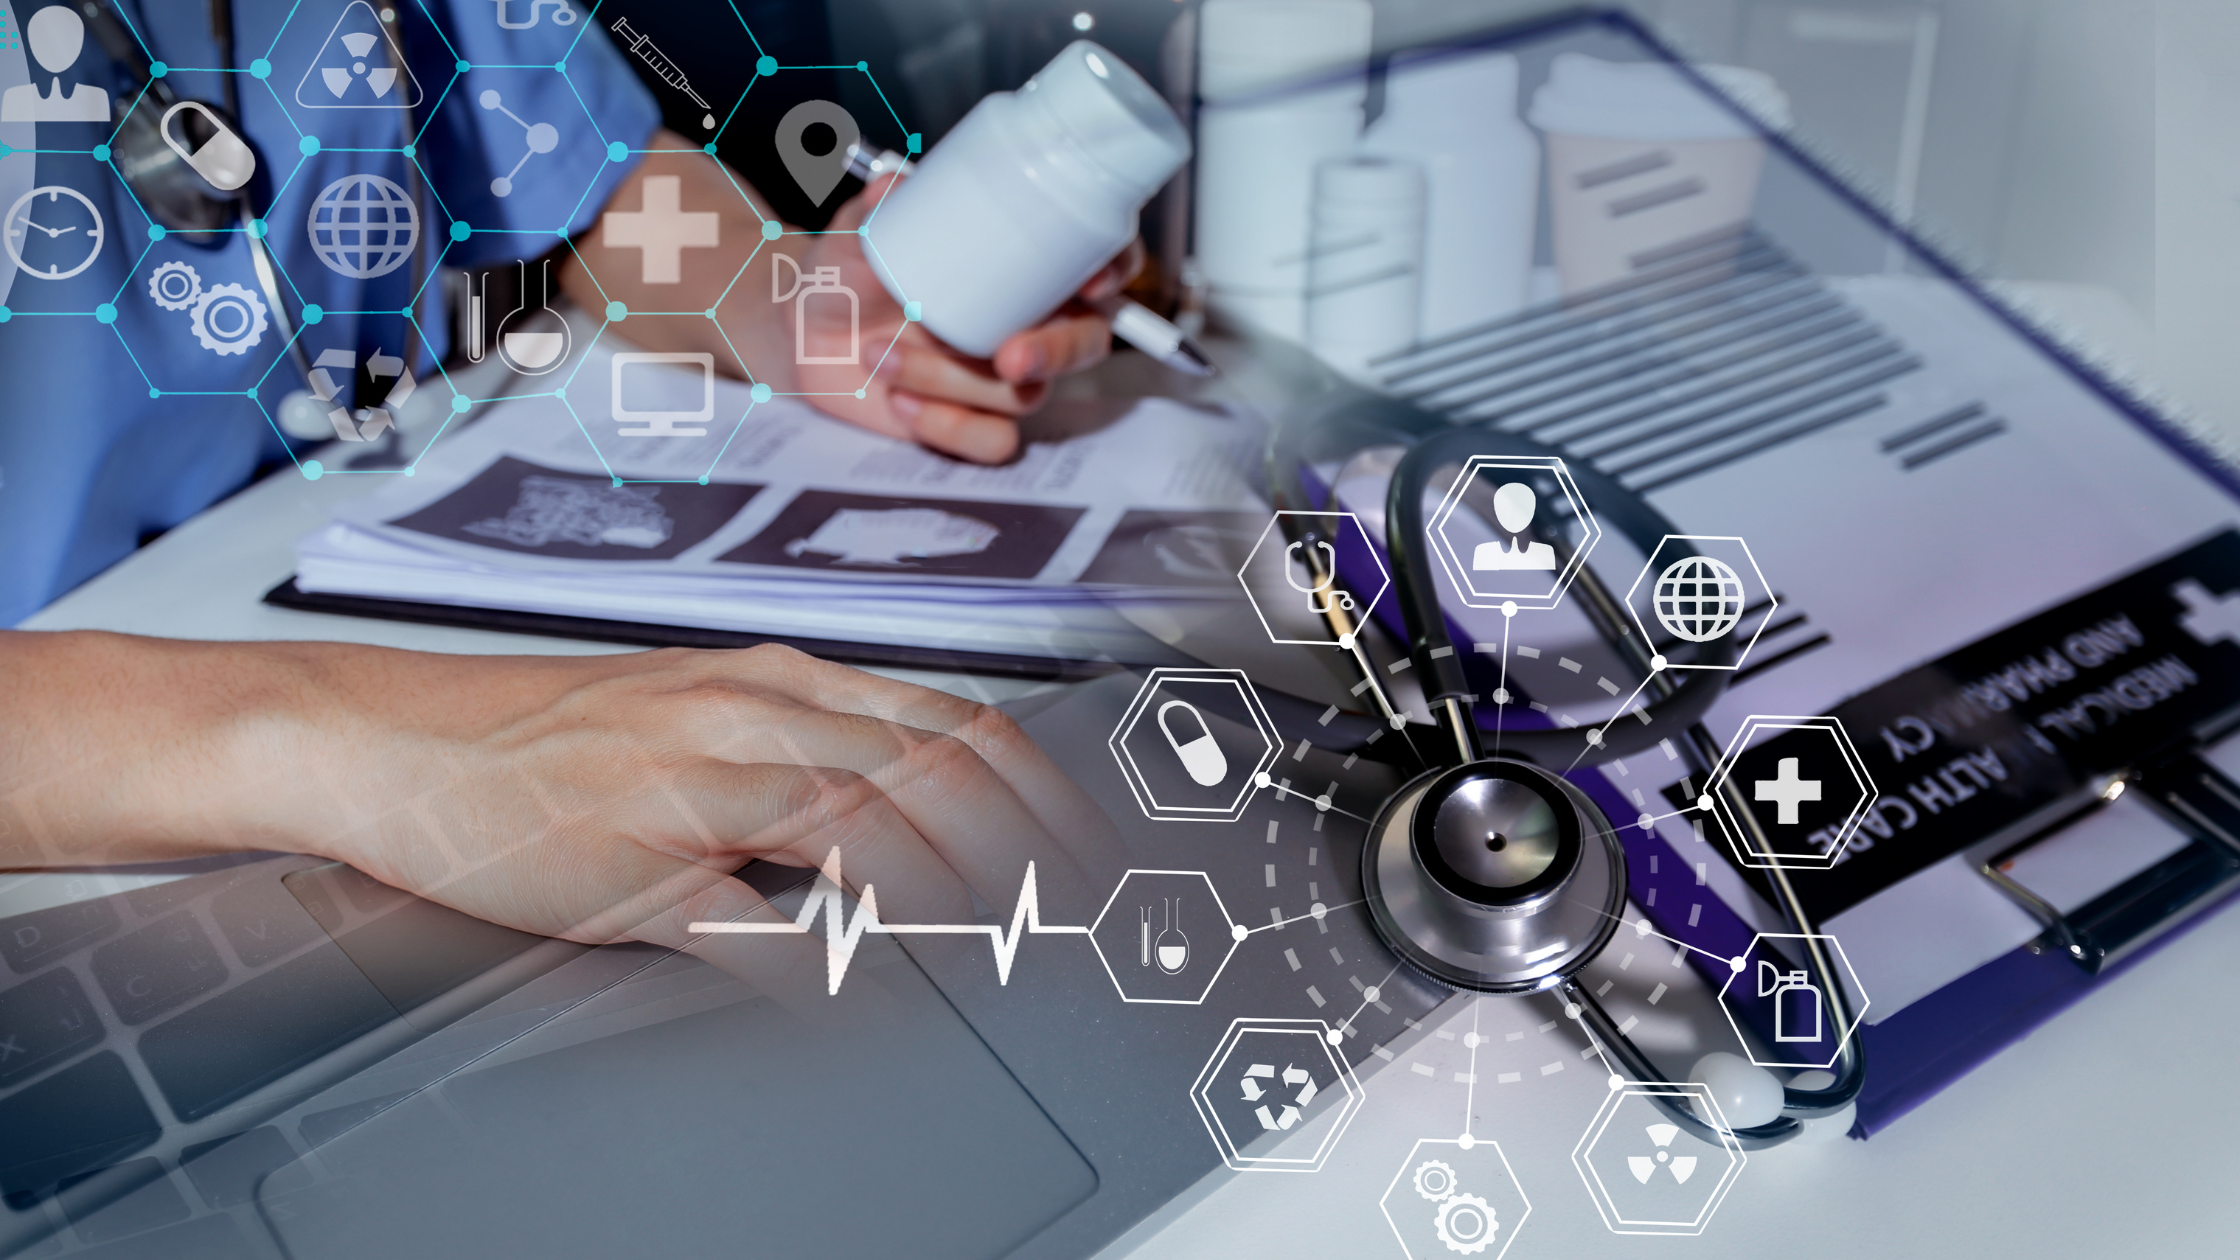 Galileo helped a leading healthcare services company optimize IT operations.